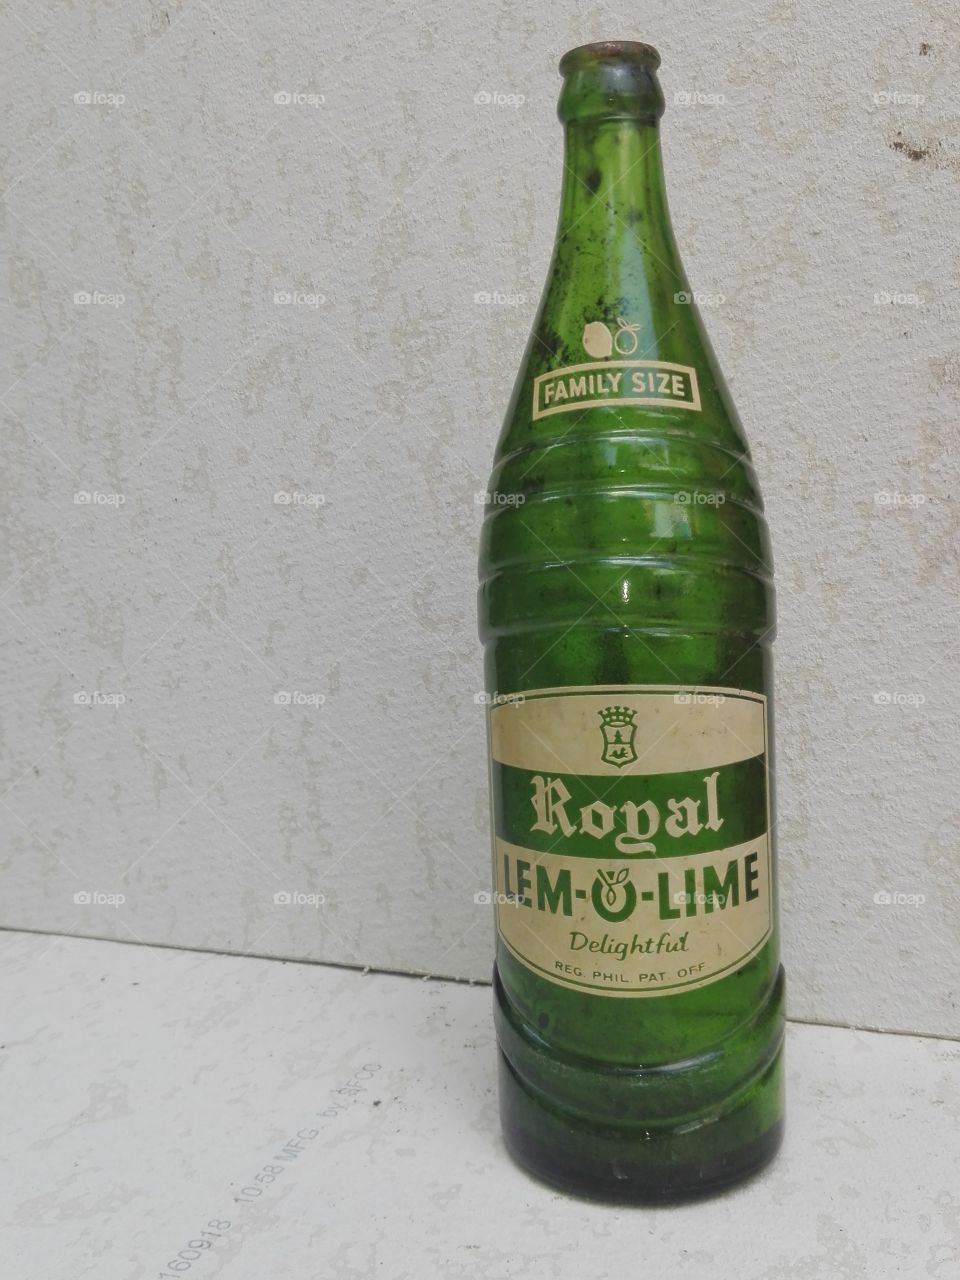 Royal Lem-O-Lime is a discontinued soft drink manufactured by Royal Tru. It was a cheap citrus-flavored soda that became popular from the 1960’s until 1970’s.